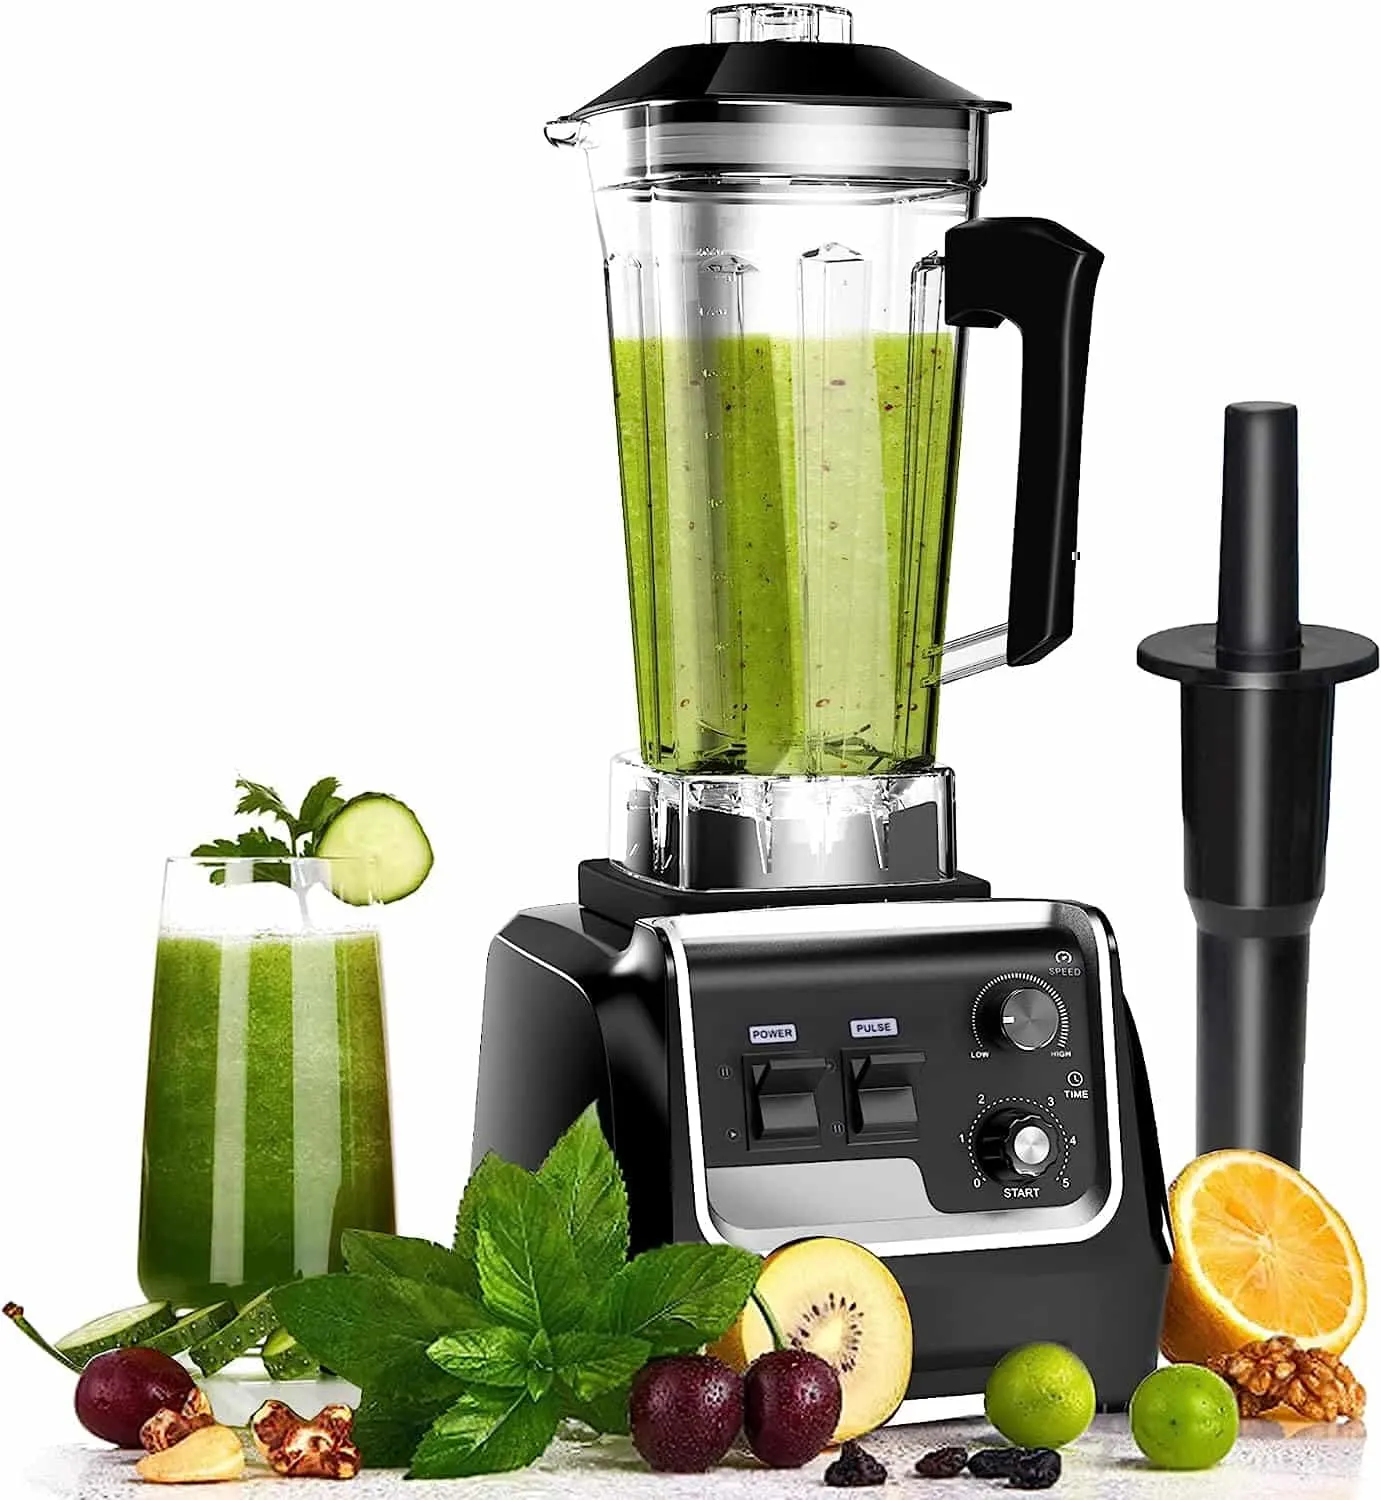 The Best Blenders For Smoothies- Looking At The Top 10